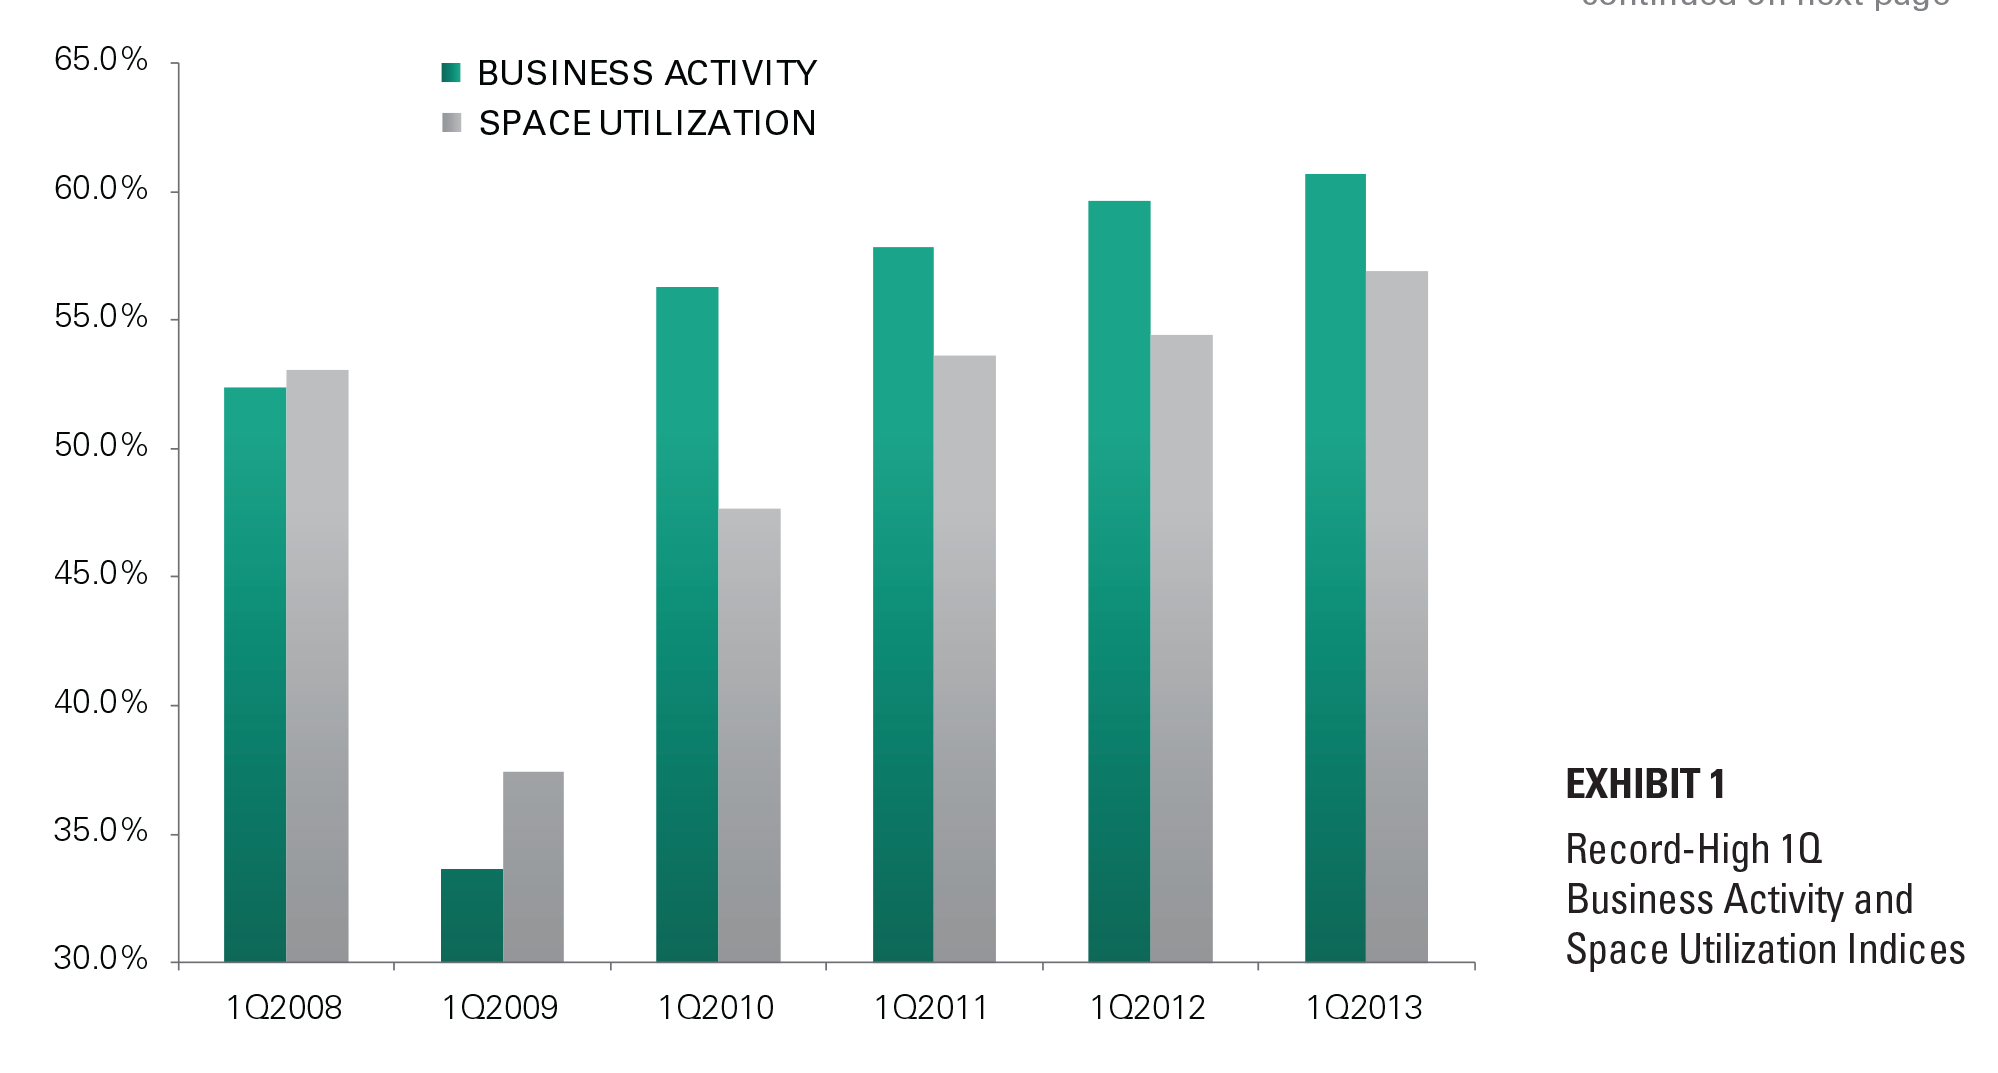 EXHIBIT 1 Record-High 1Q Business Activity and Space Utilization Indices